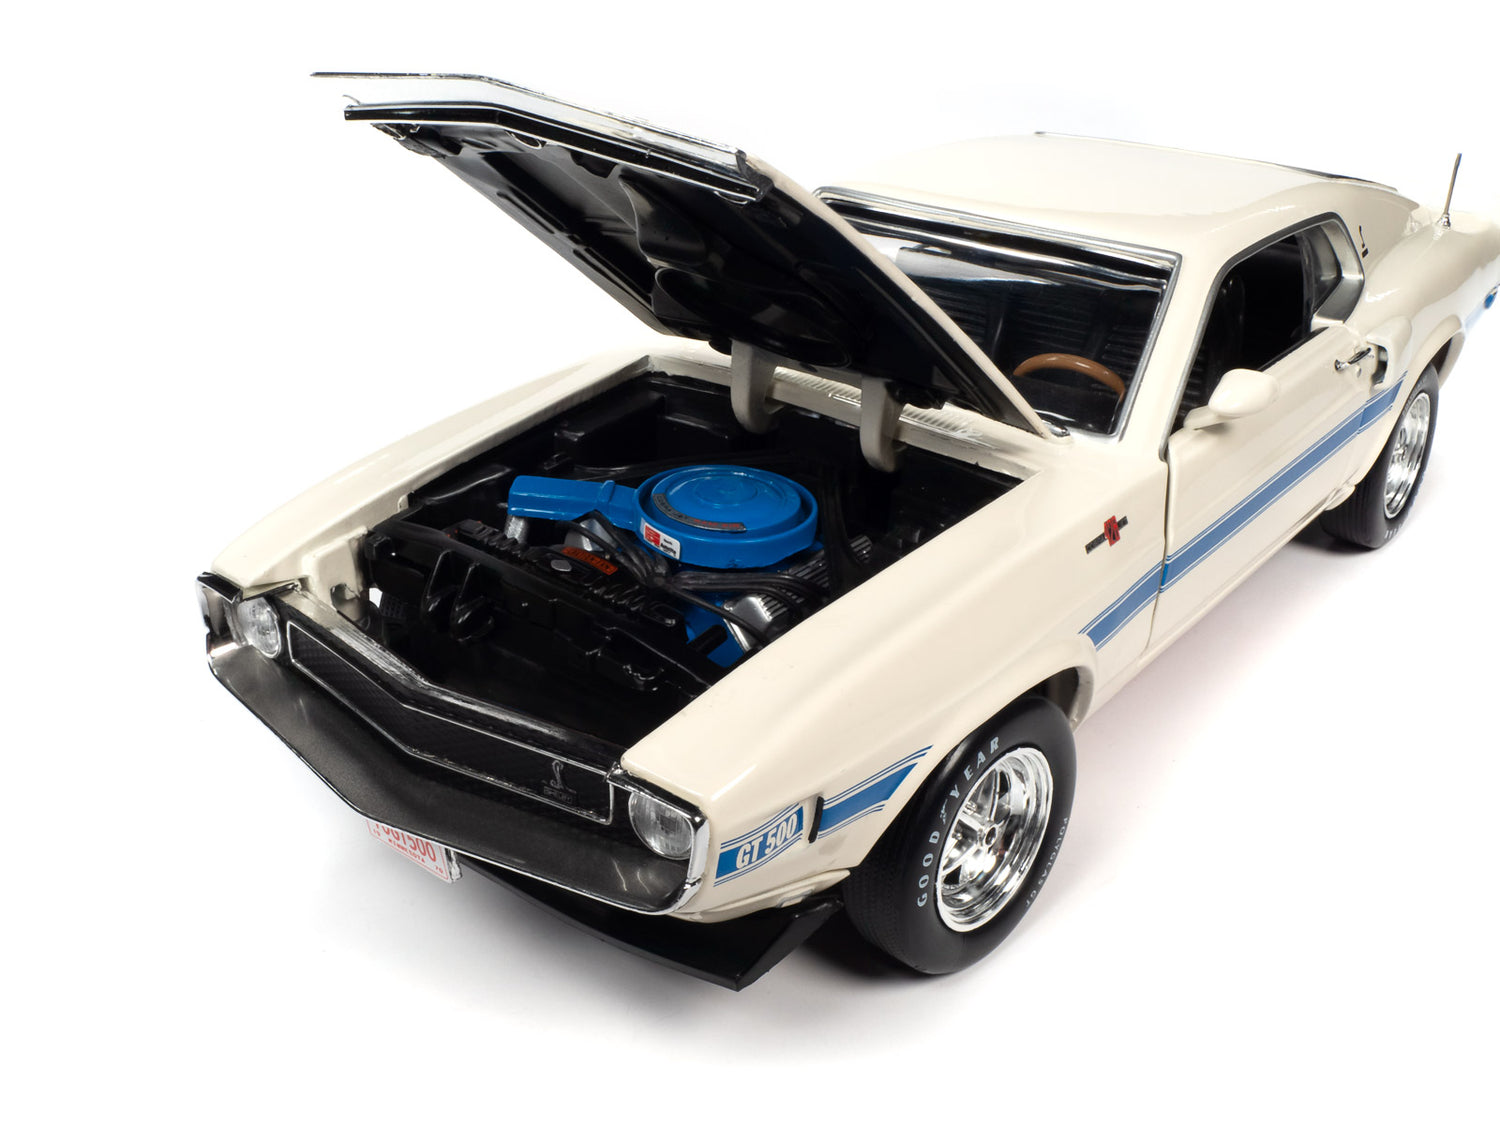 American Muscle 1970 Shelby GT-500 1:18 Scale Diecast